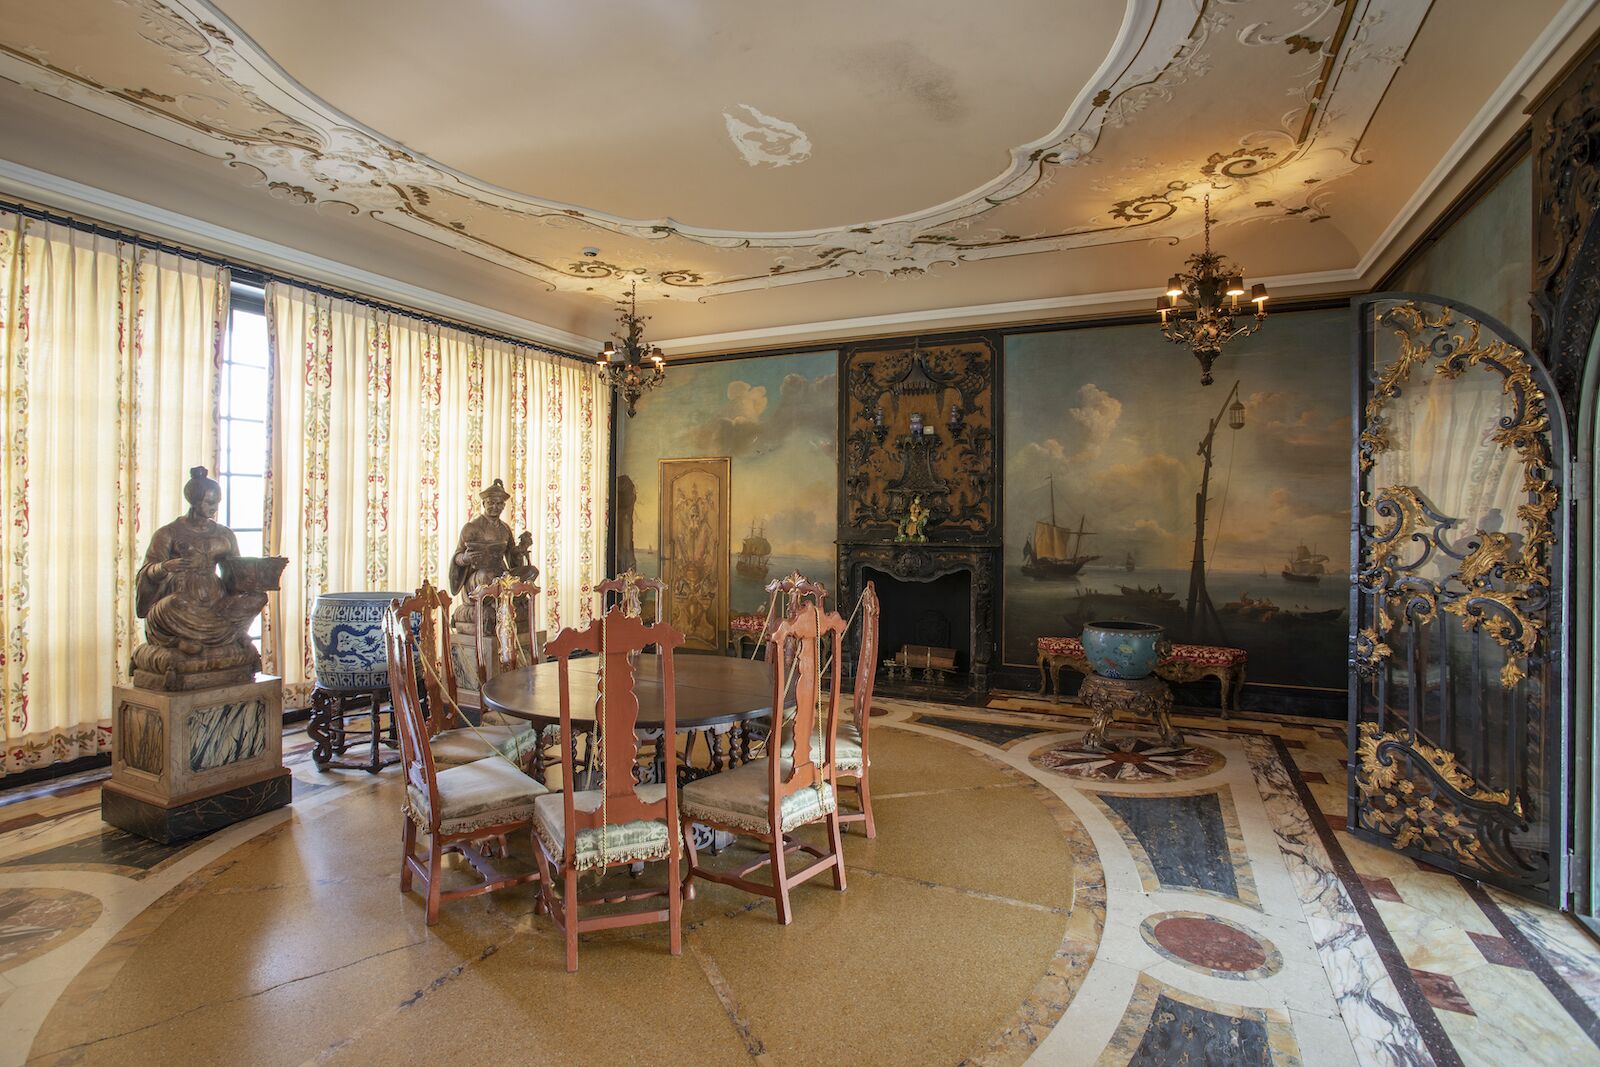 The Breakfast Room, decorated in Asian style, at the Vizcaya Museum 